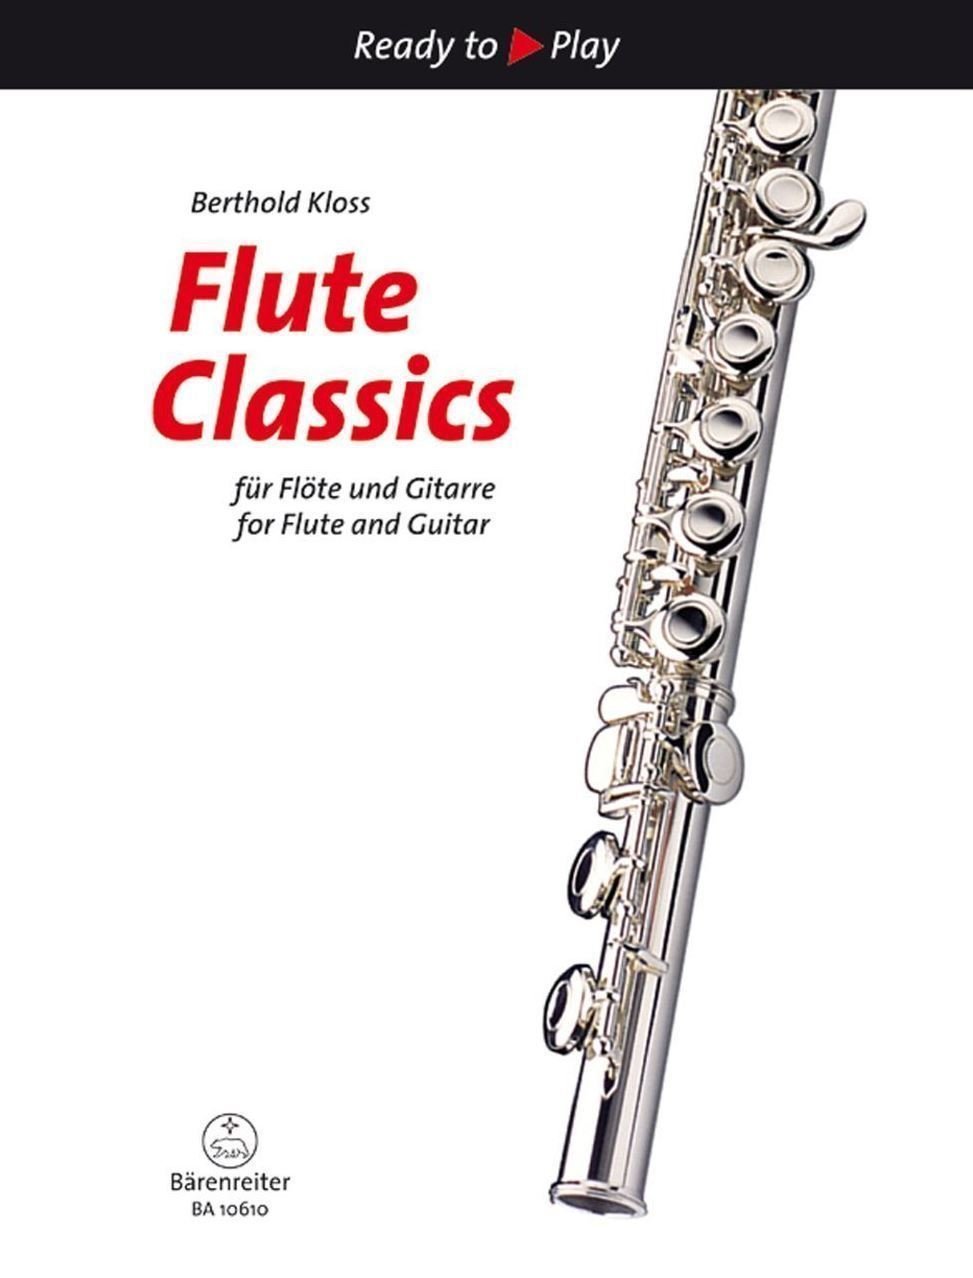 Music sheet for wind instruments Bärenreiter Flute Classic for Flute and Guitar Music Book